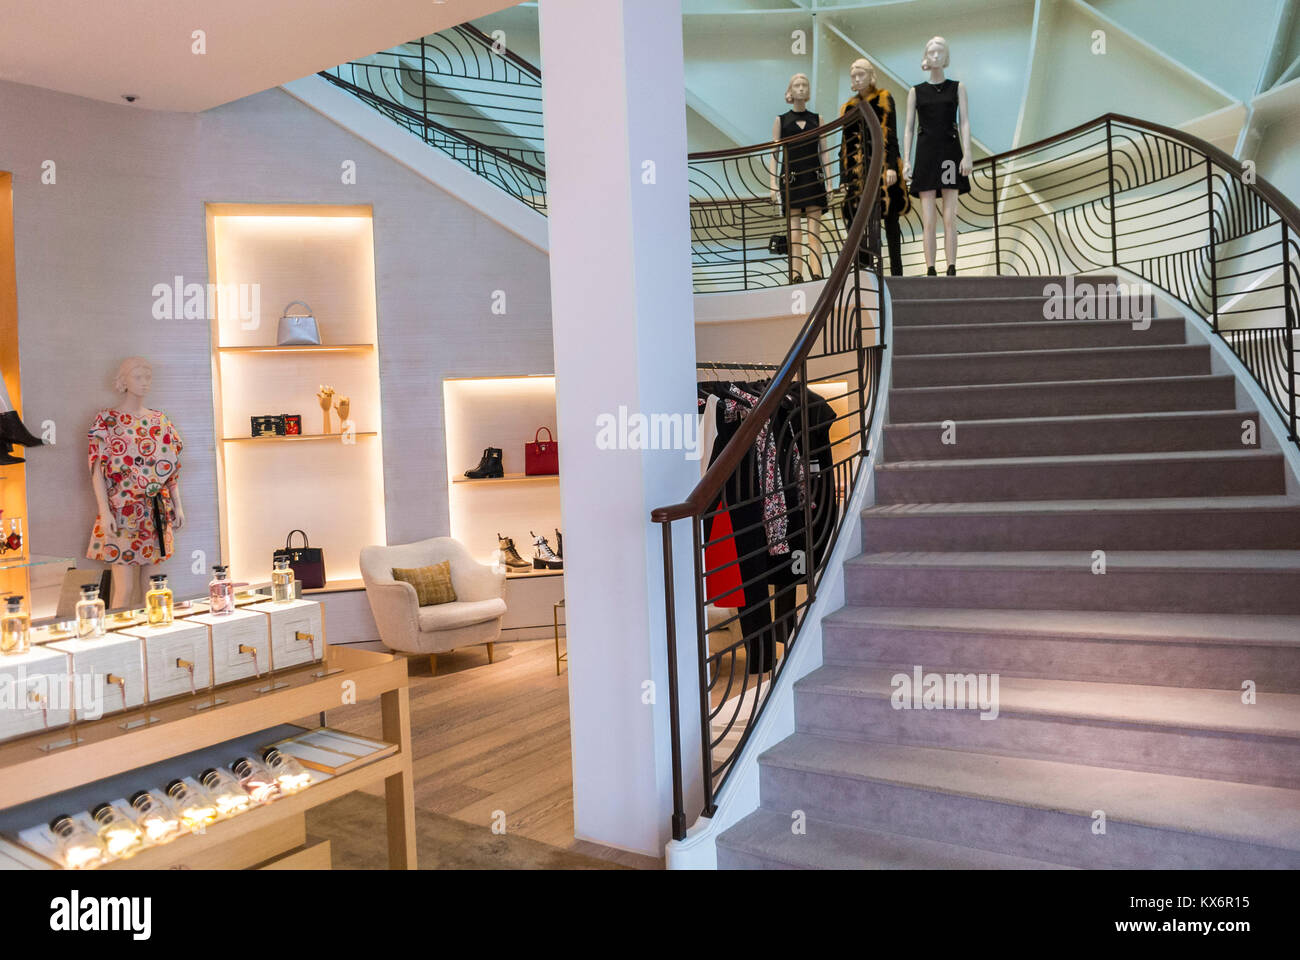 Lvmh Cut Out Stock Images & Pictures - Alamy